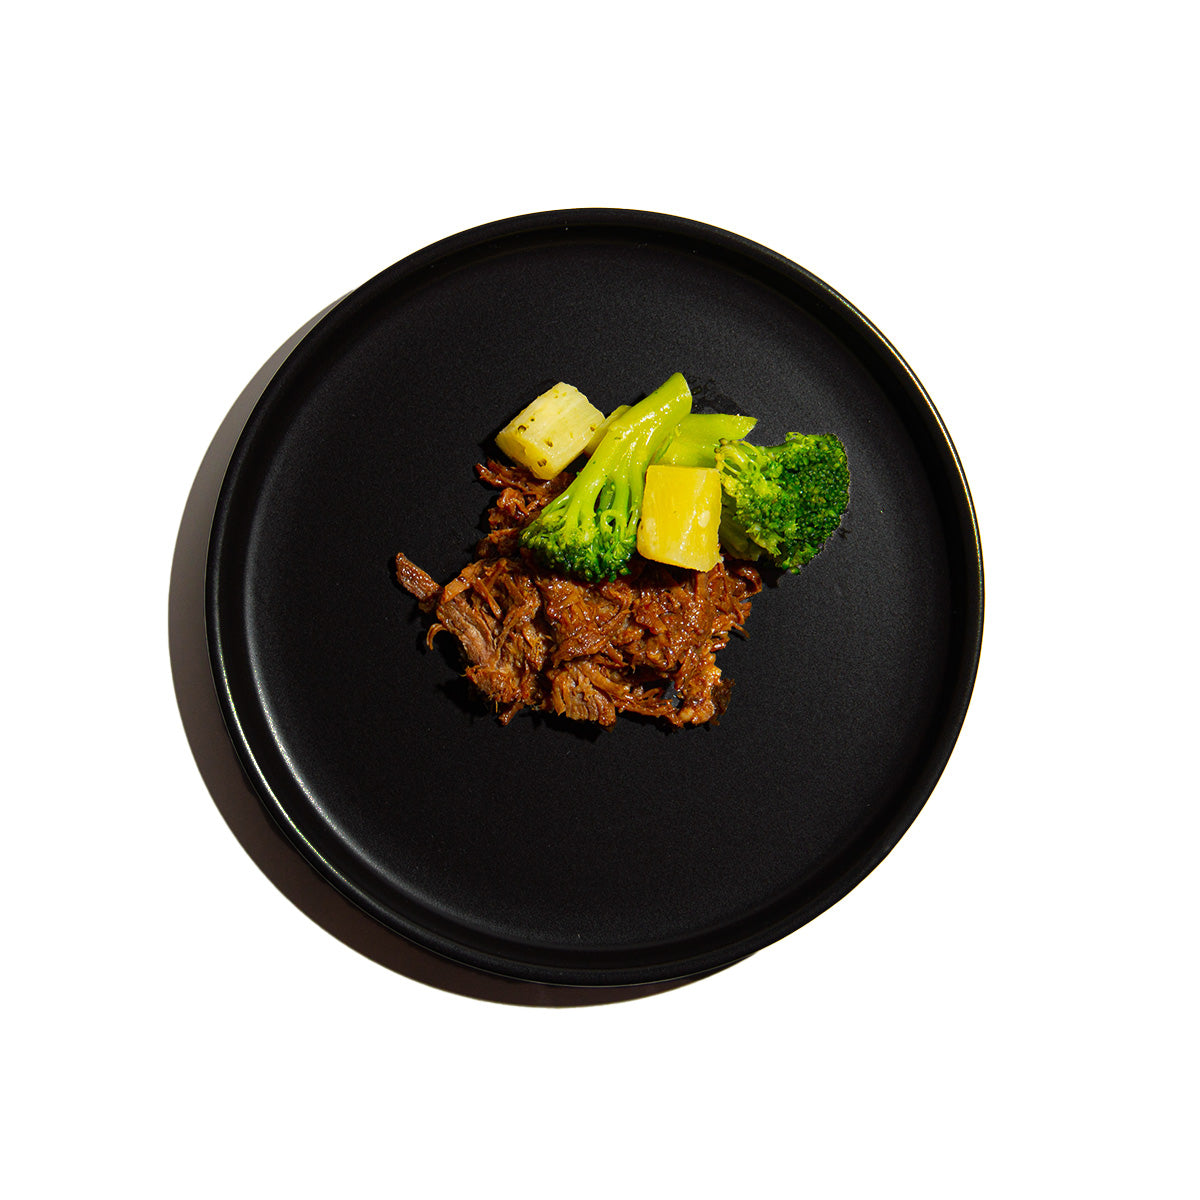 image of MyFitFoods meal - Hawaiian Beef and Broccolli - bariatric - plated